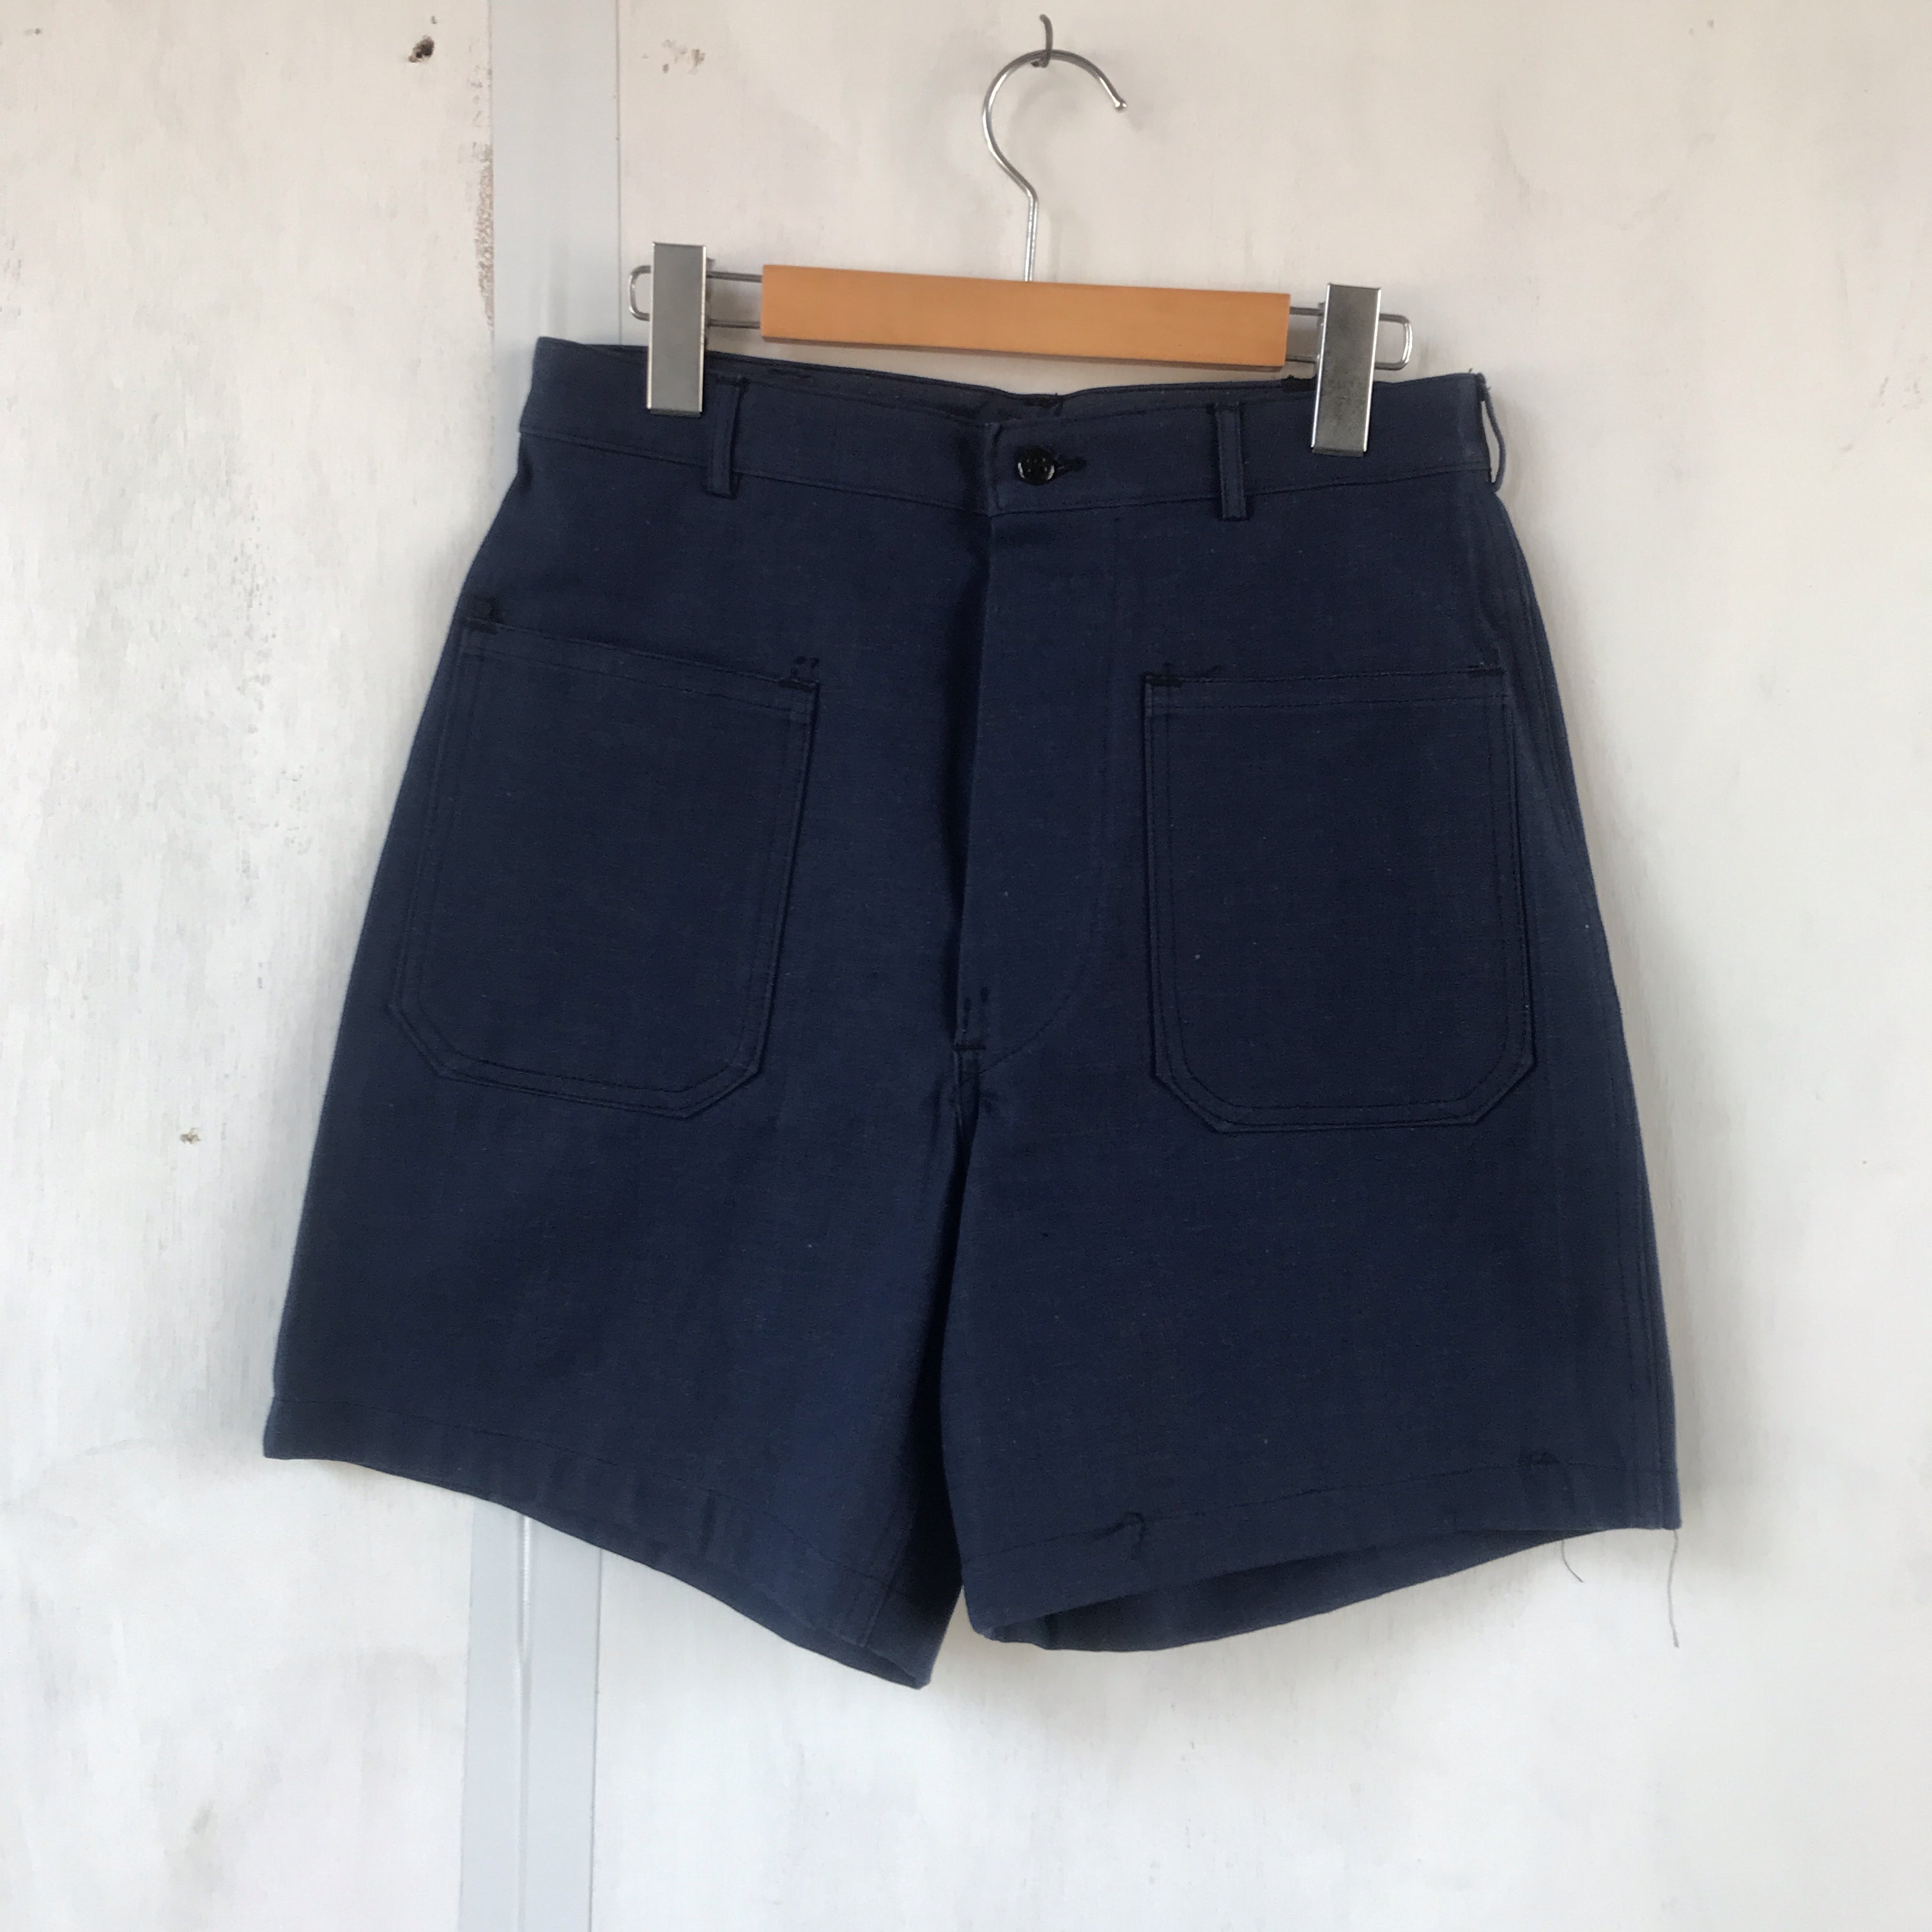 [ ONLY ONE ! ] CUT OFF 80’s Denim Utility Pants / Mr.Clean Select